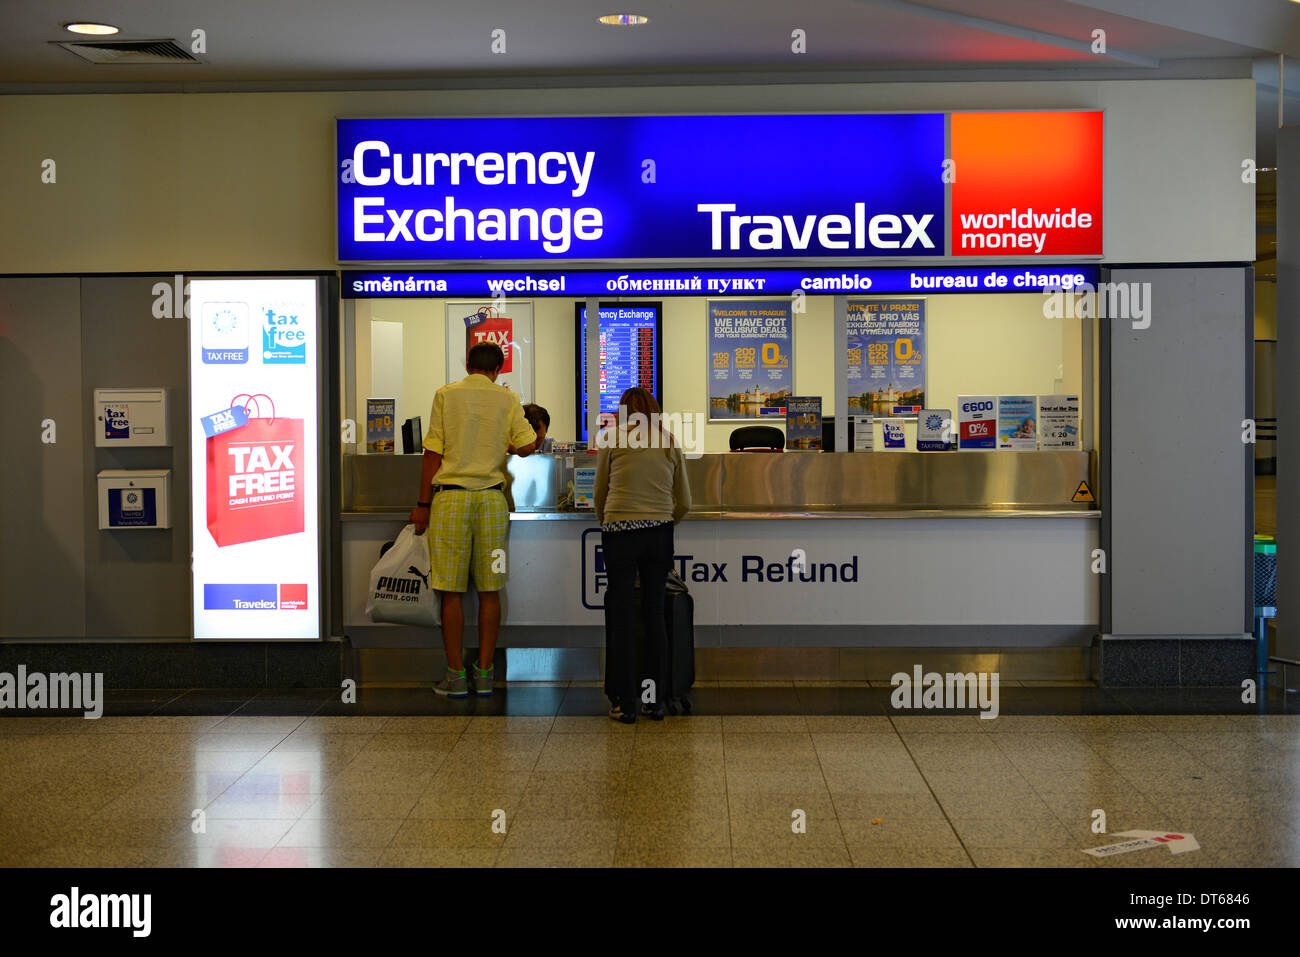 Currency exchange praque czech republic airport money taxes refund Stock Photo: 66520950 - Alamy